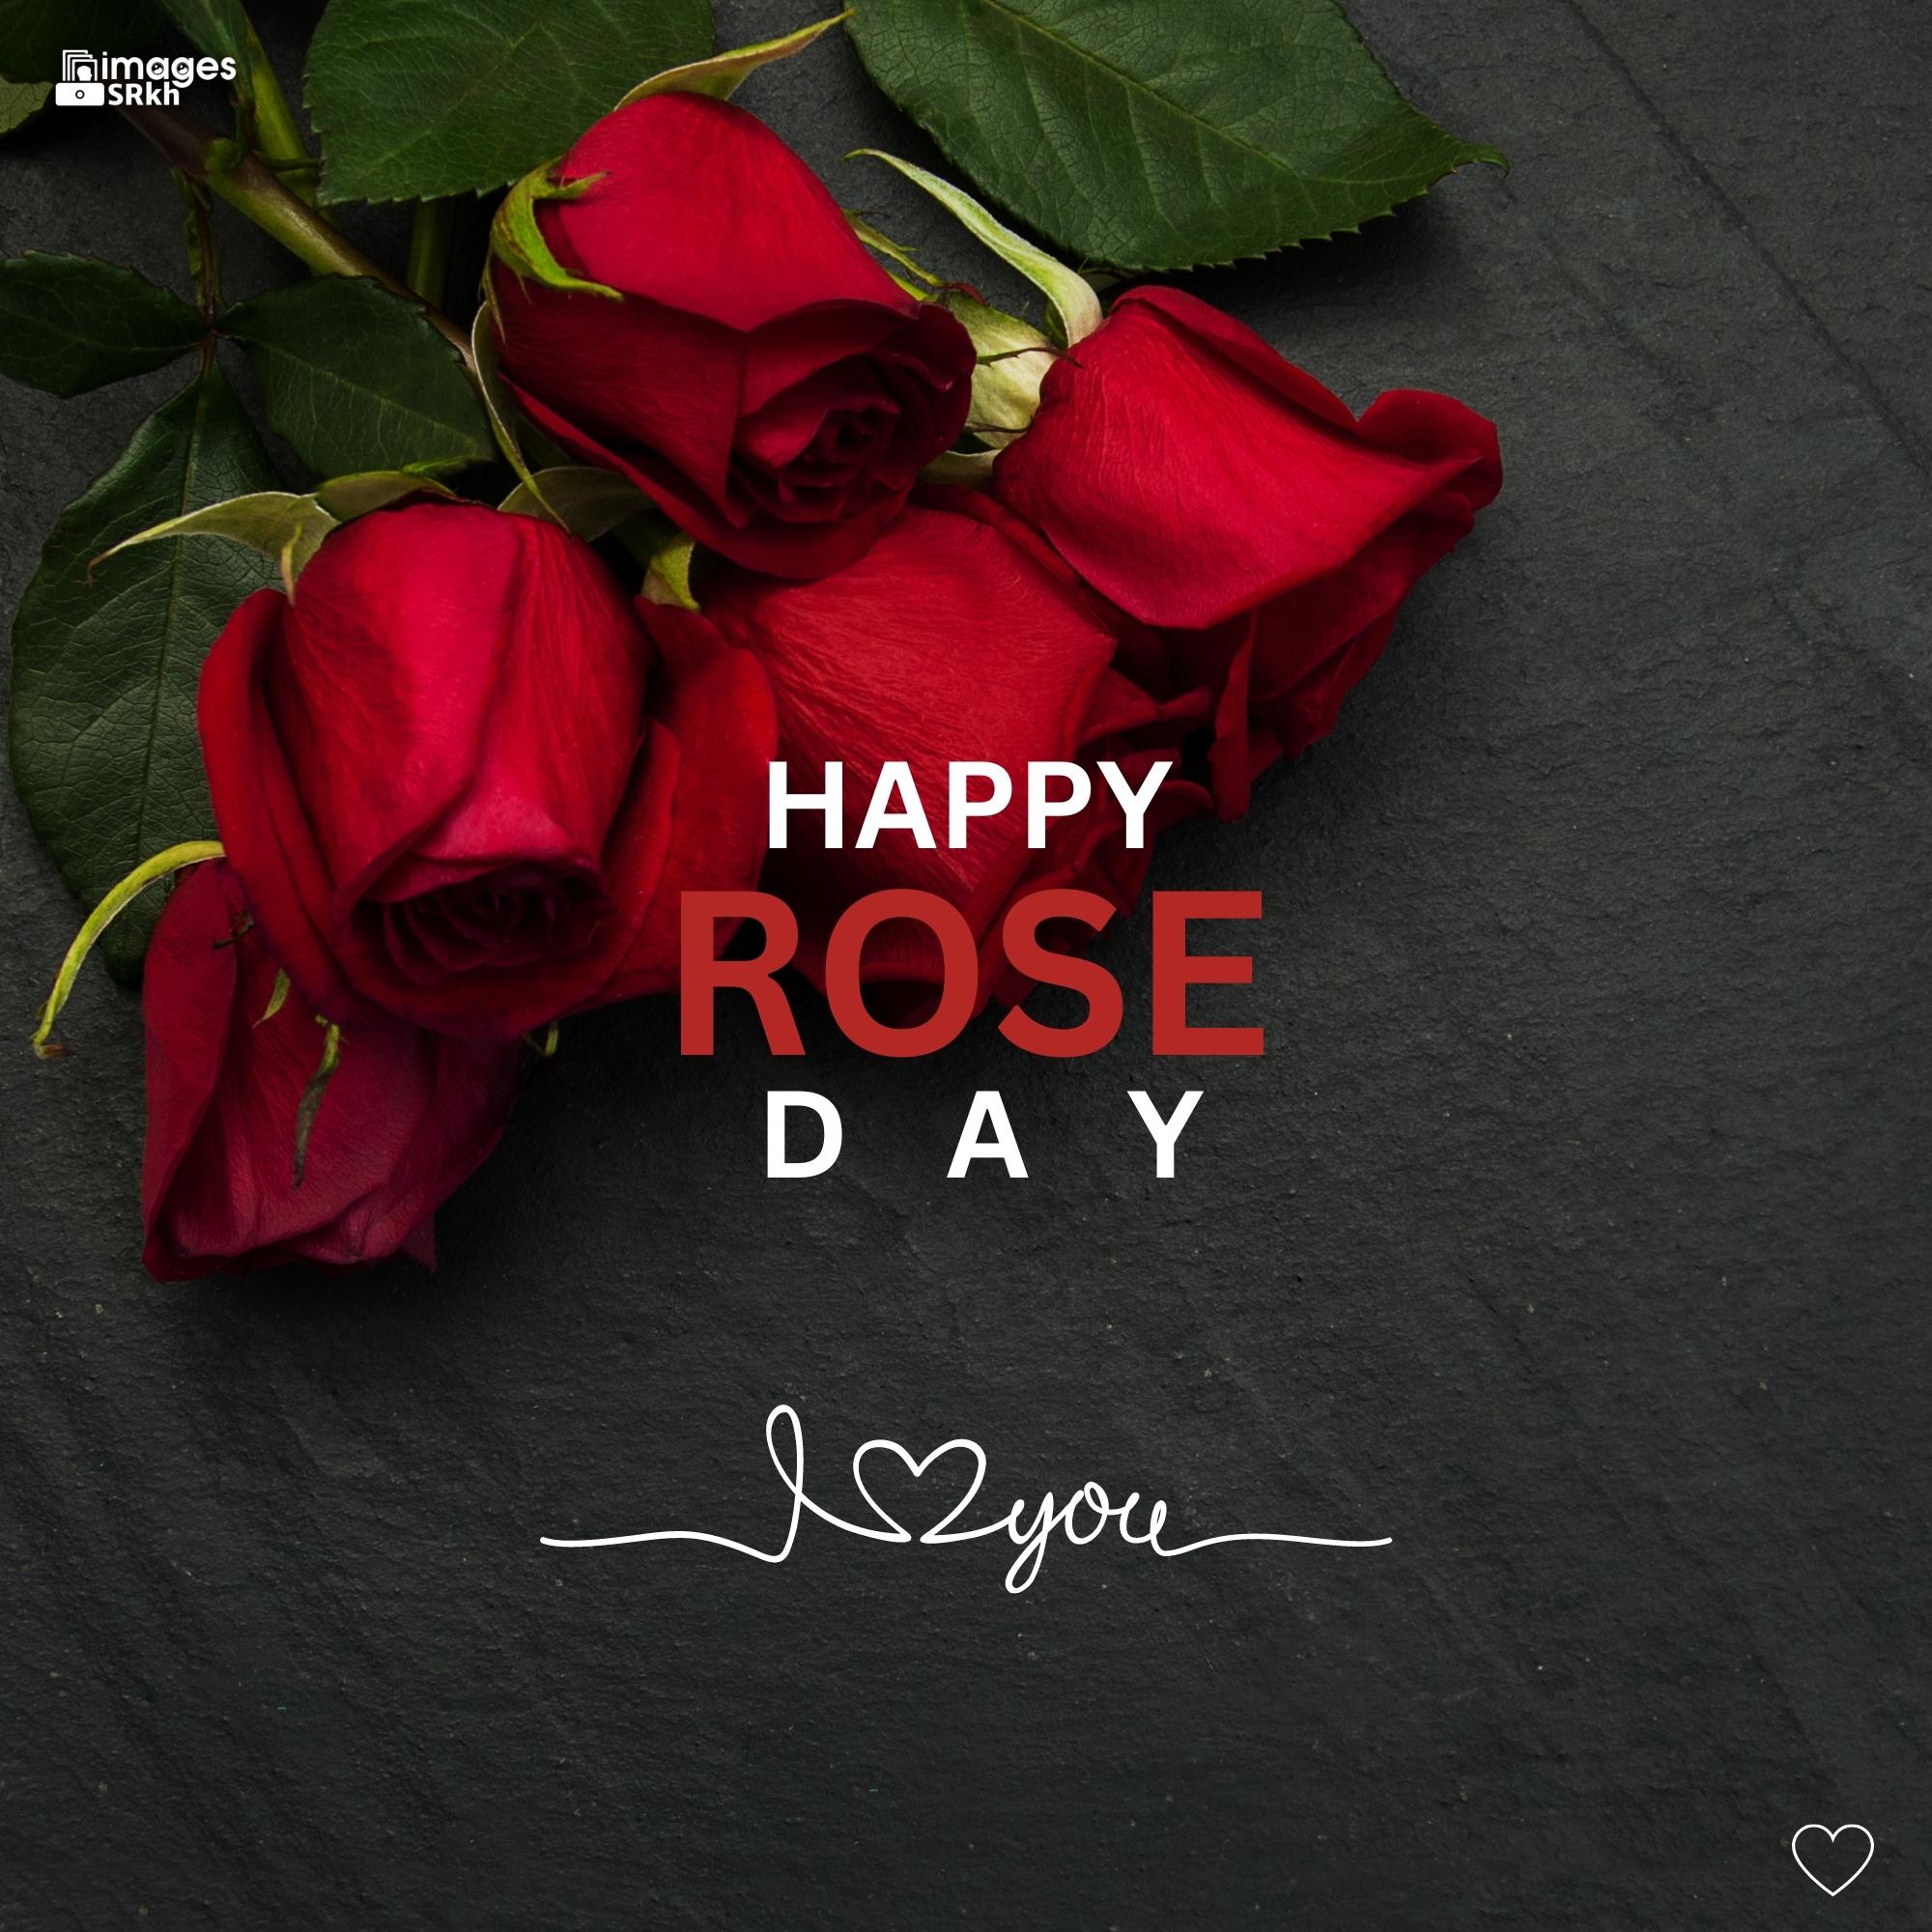 Happy Rose Day Image Hd Download (45)